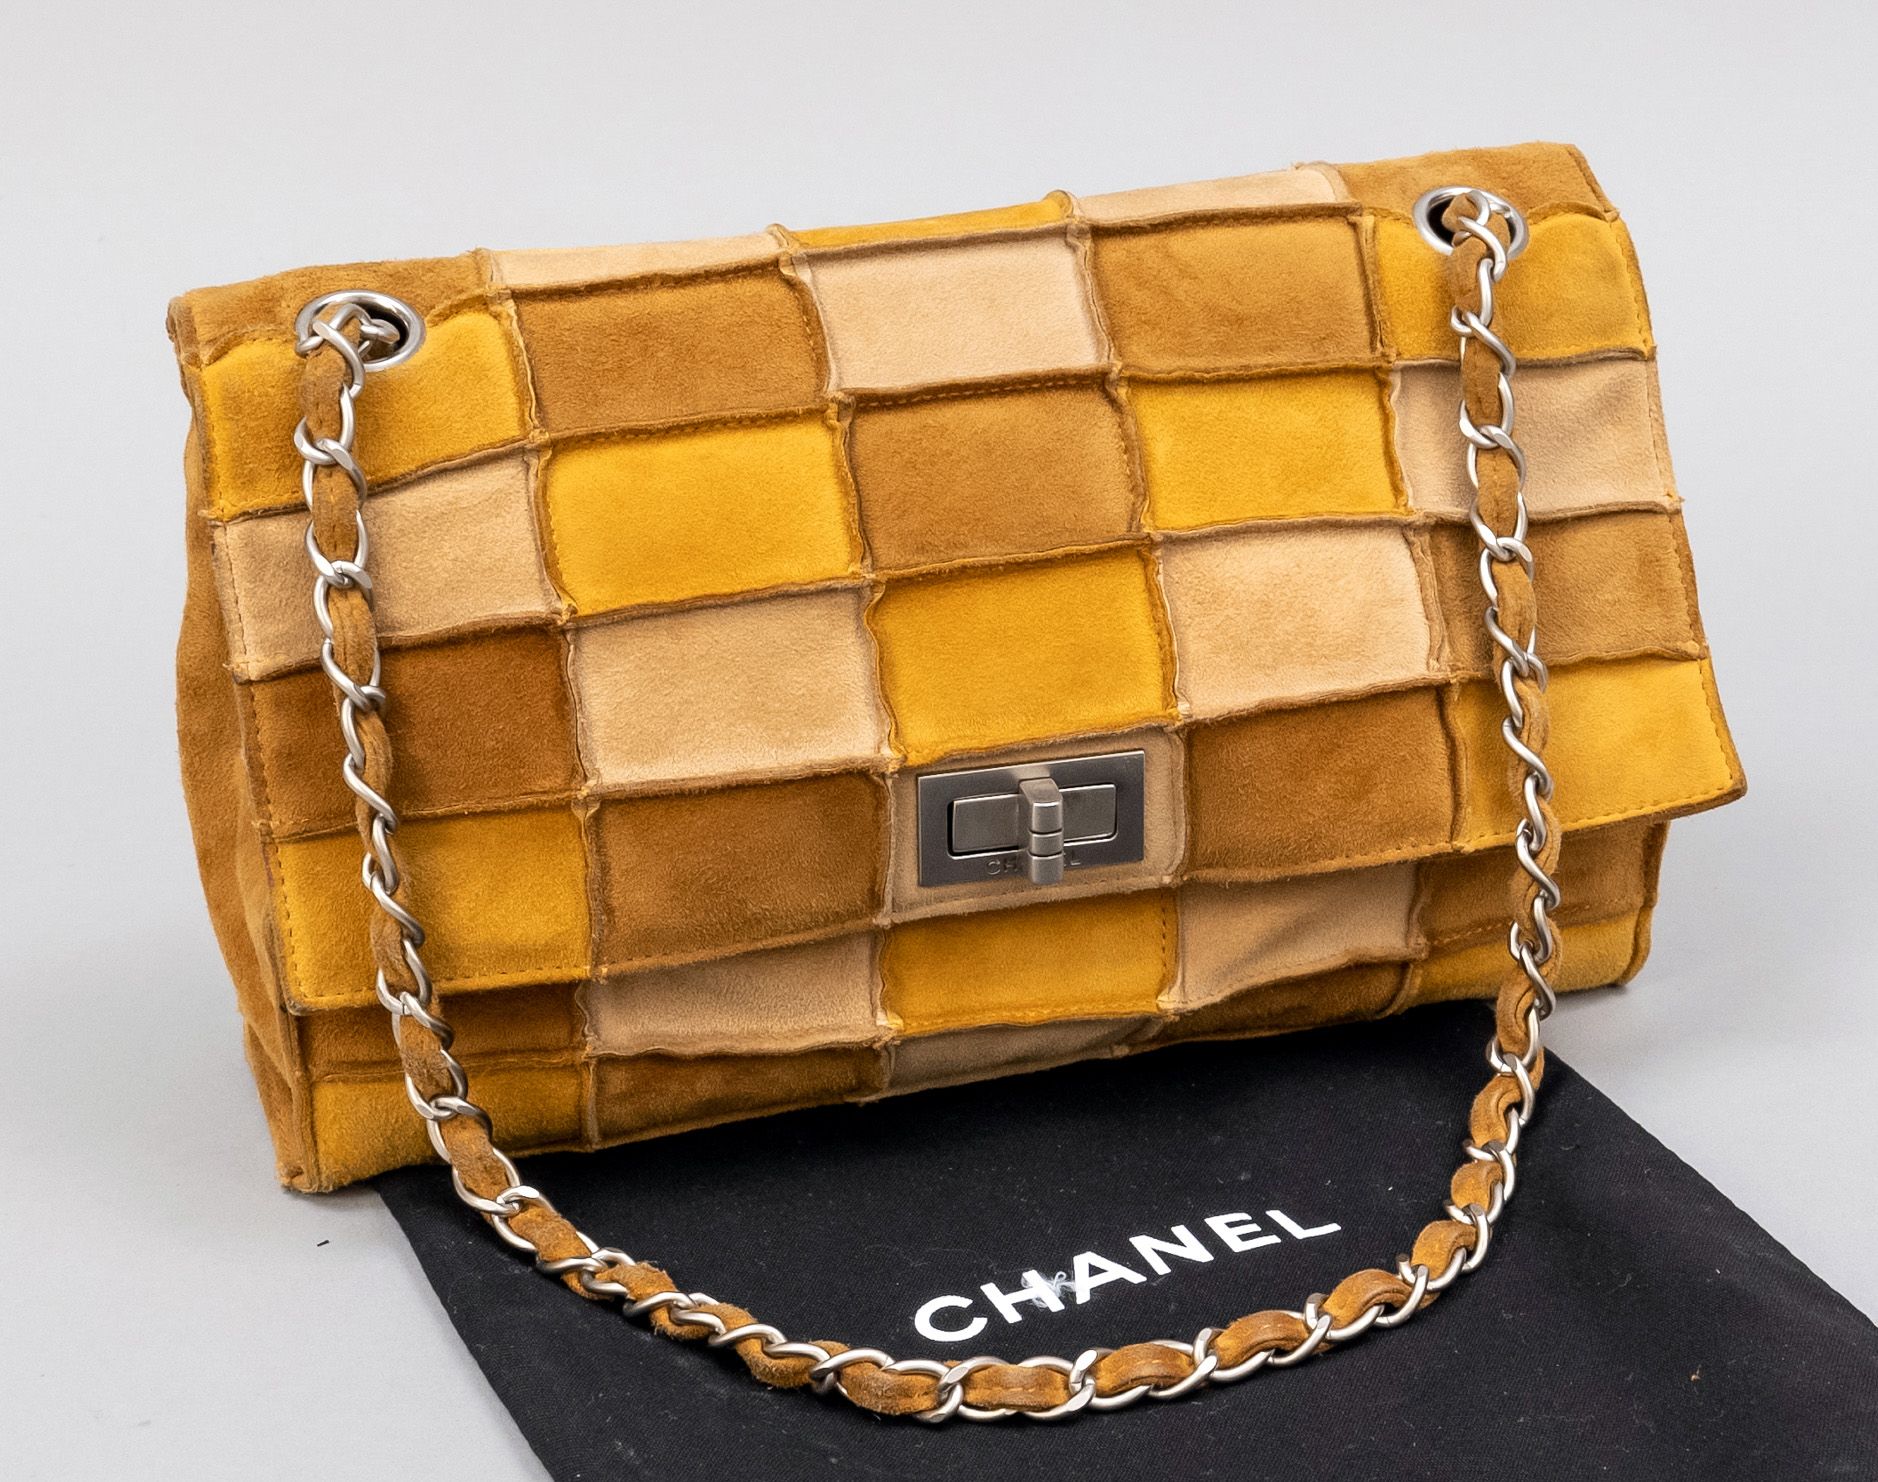 Null Chanel, Mademoiselle Suede Patchwork Flap Bag, soft suede in shades of beig&hellip;